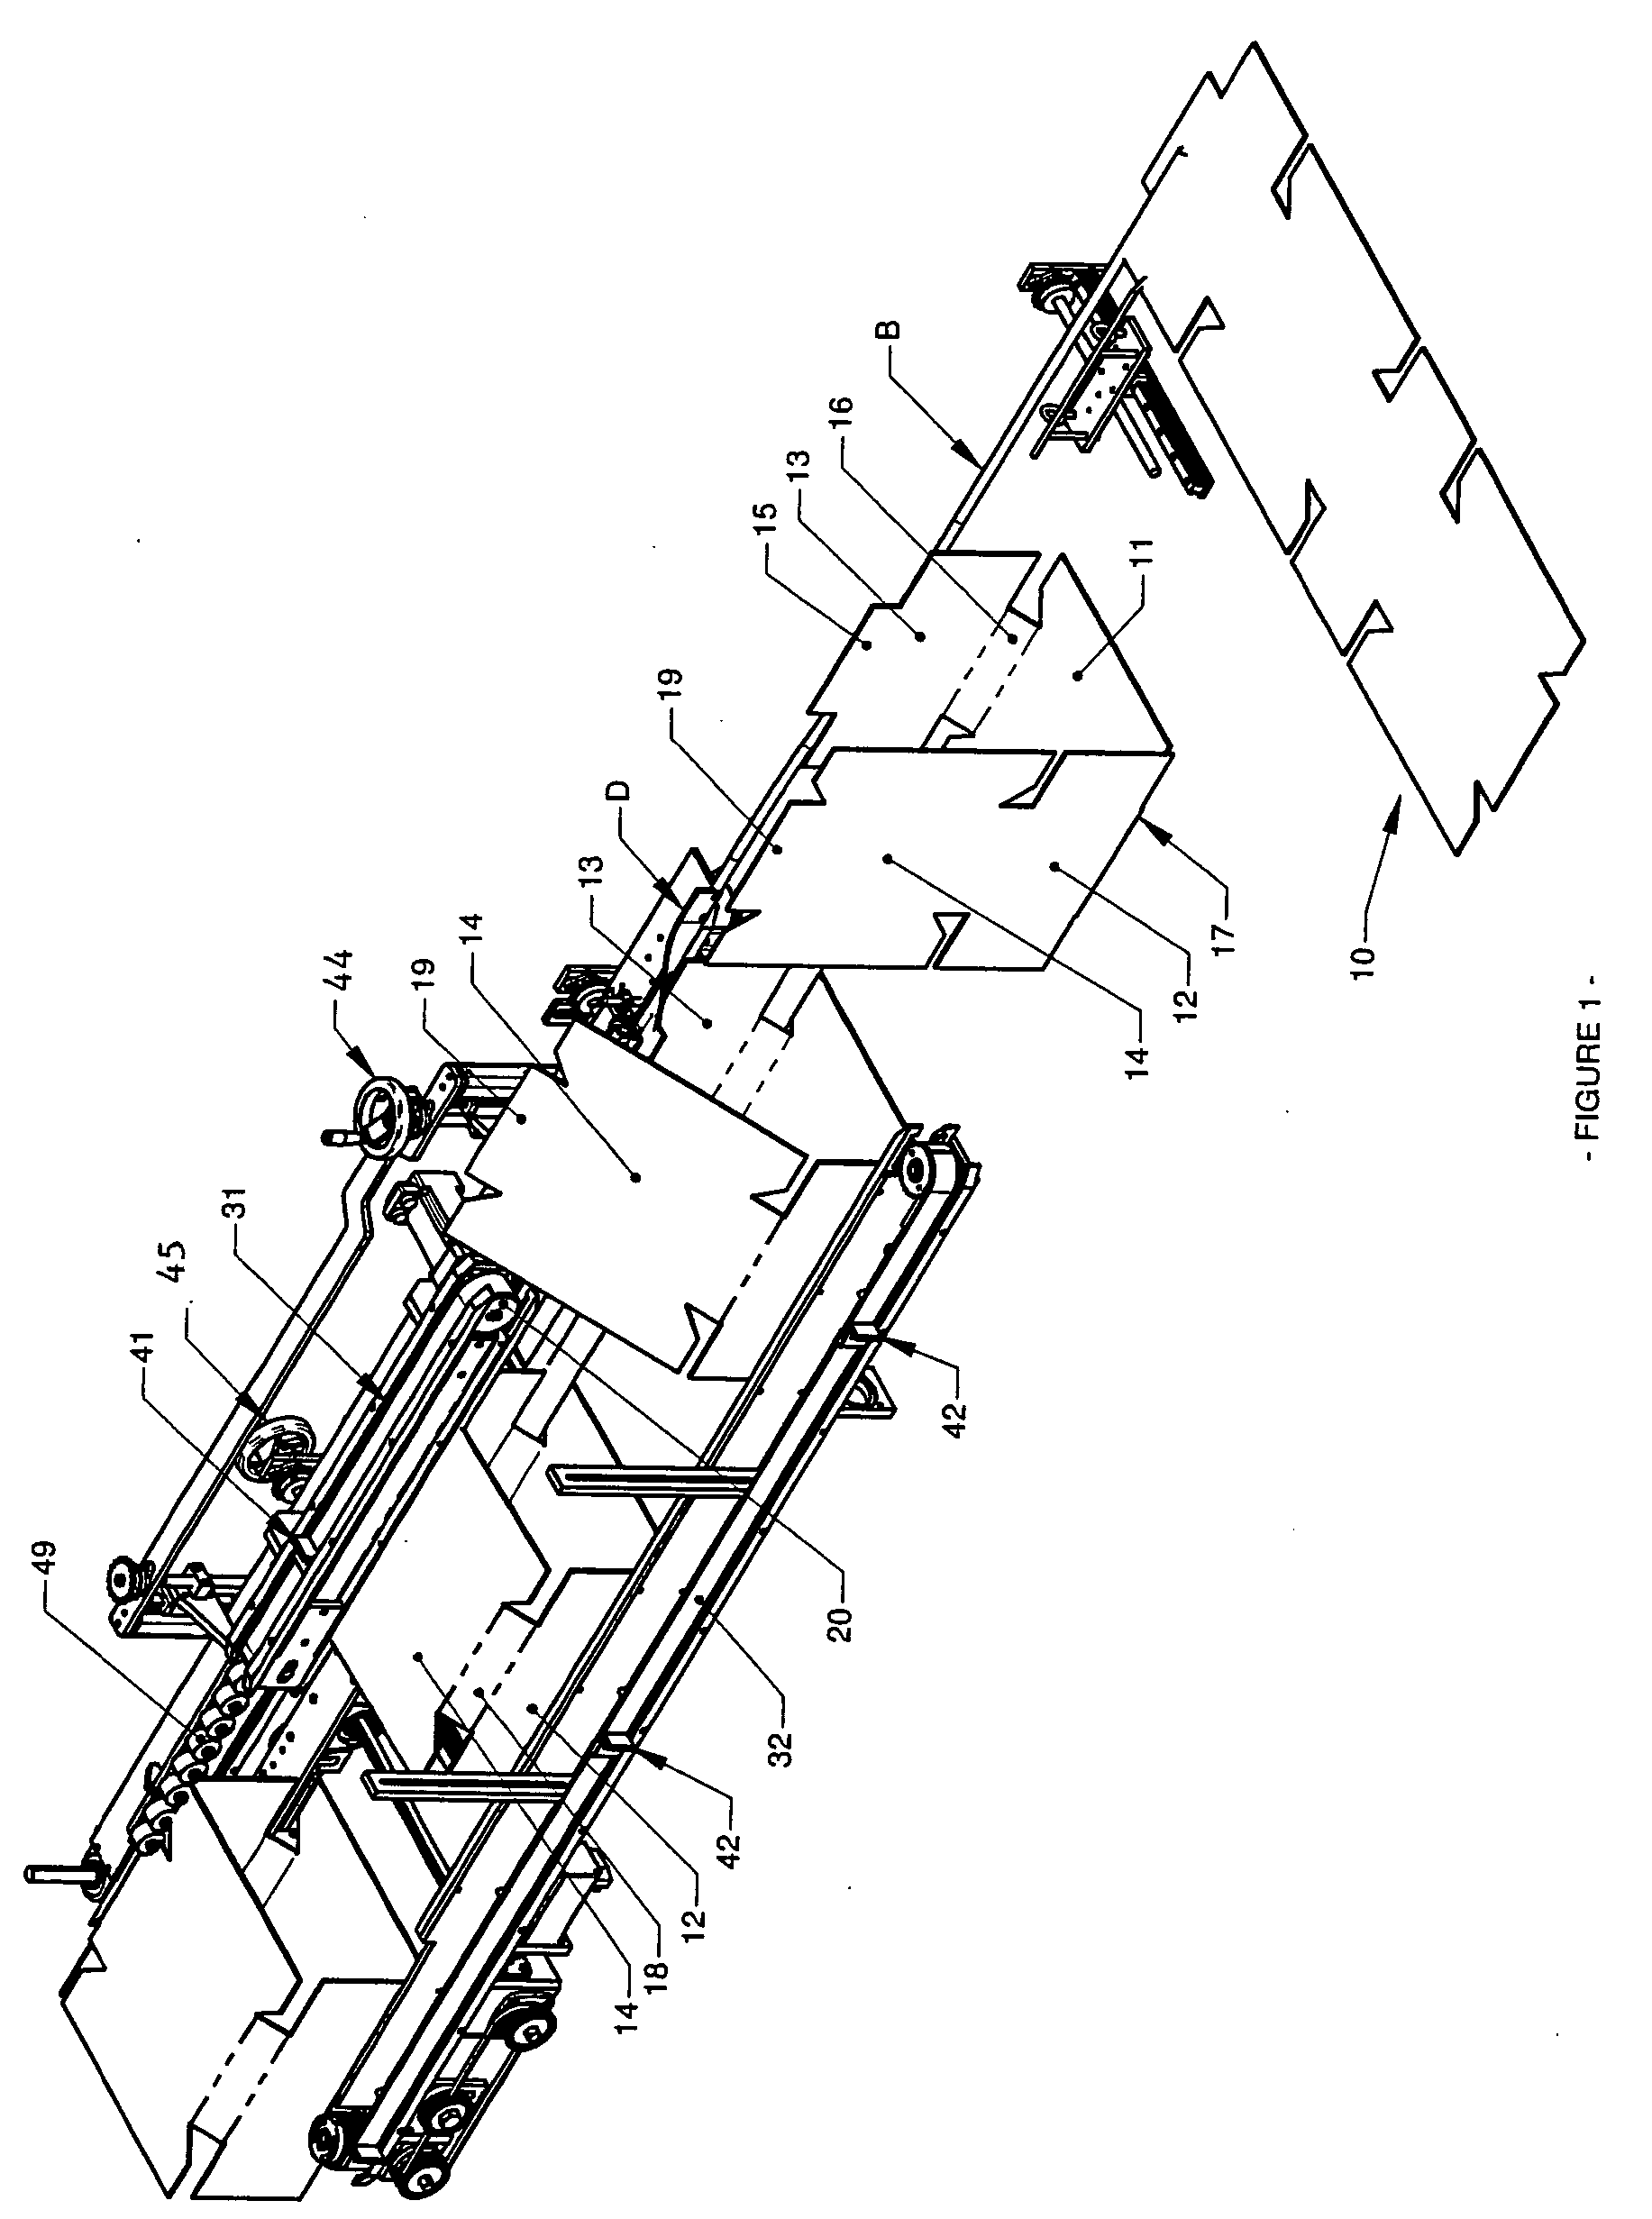 Positioning apparatus for container forming machine